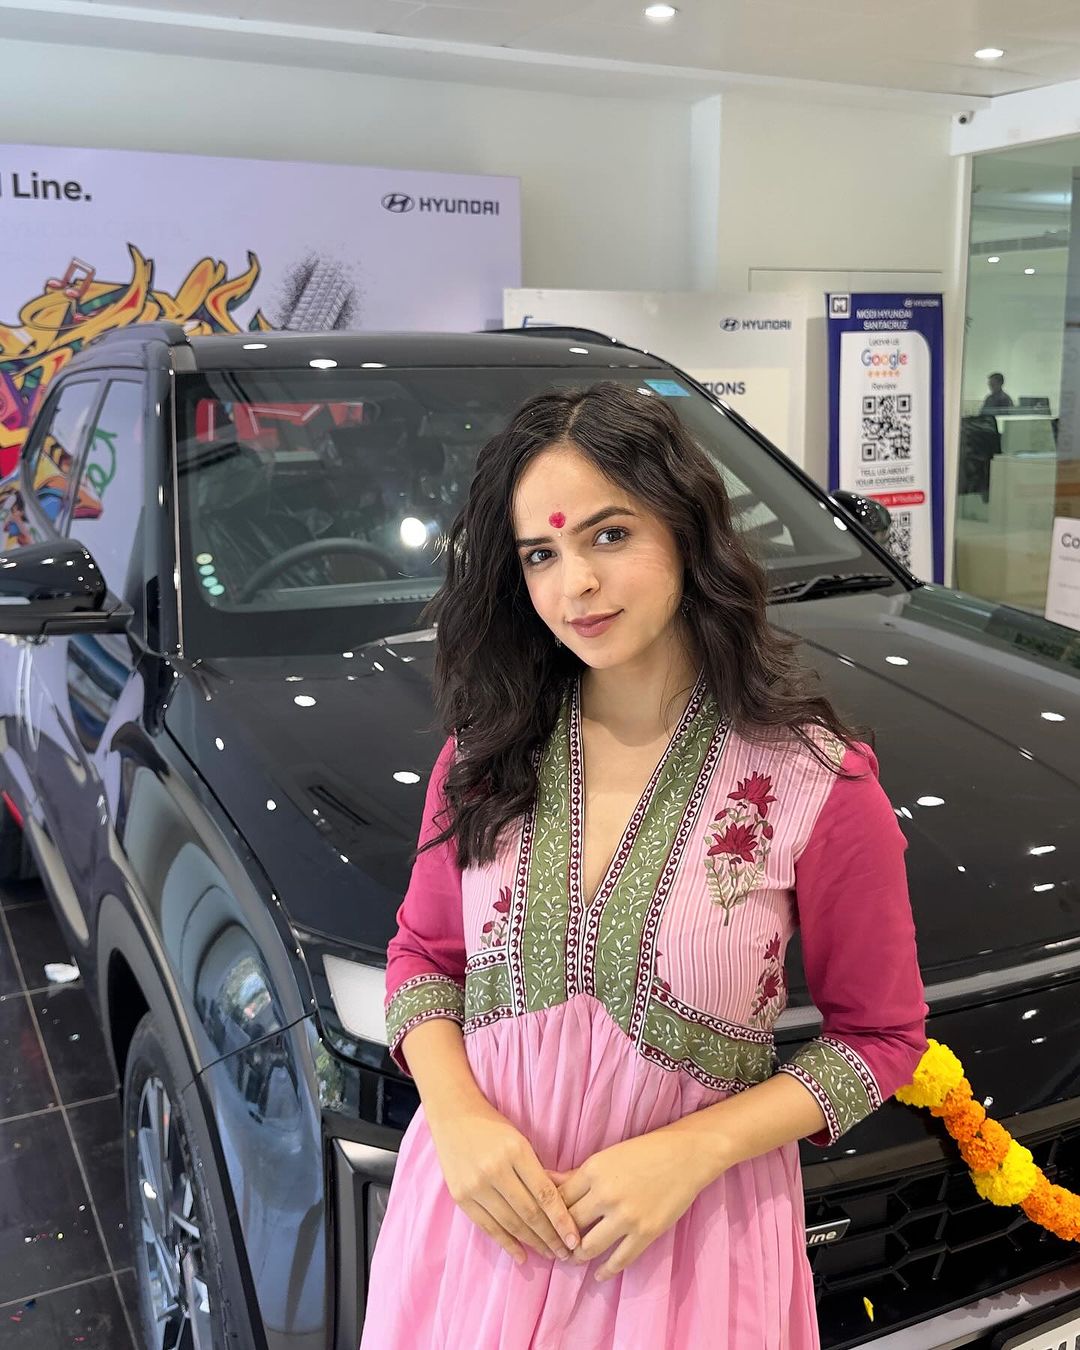 A Swanky Car For 26th birthday! Palank Sindhwani is now the owner of a new swanky car for her 26th birthday